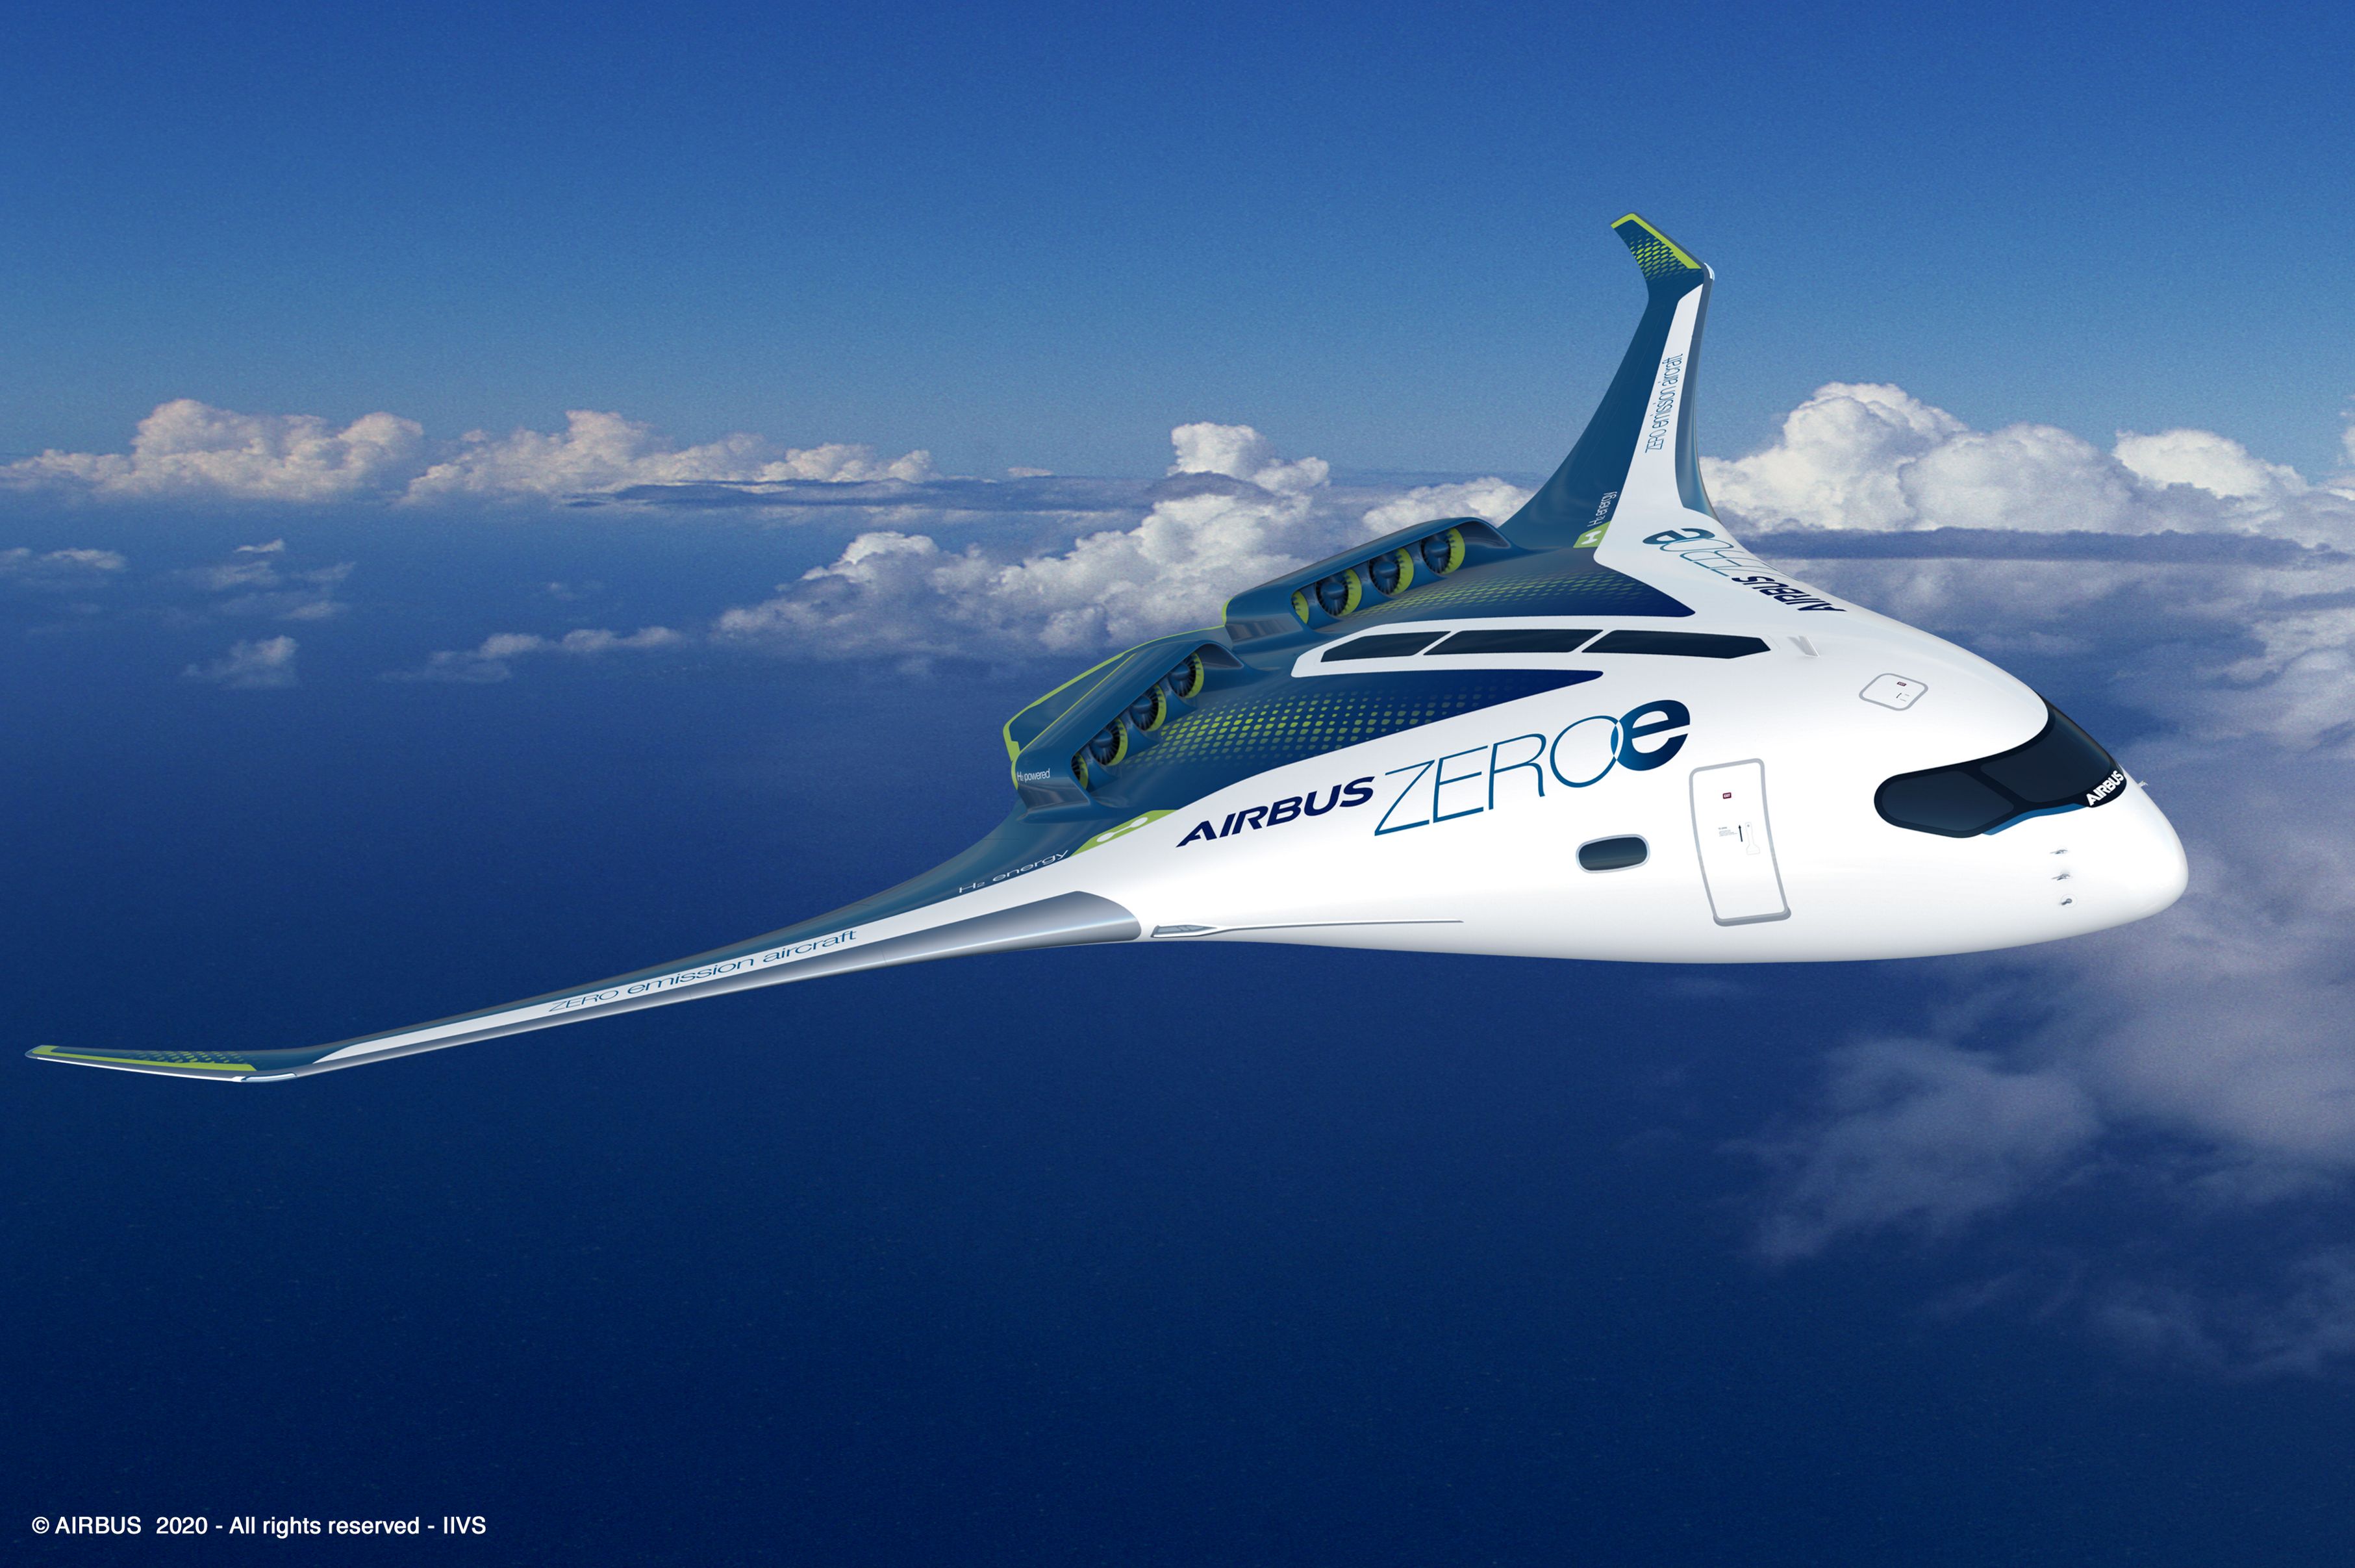 Airbus reveals new zero-emission concept aircraft - Innovation - Airbus